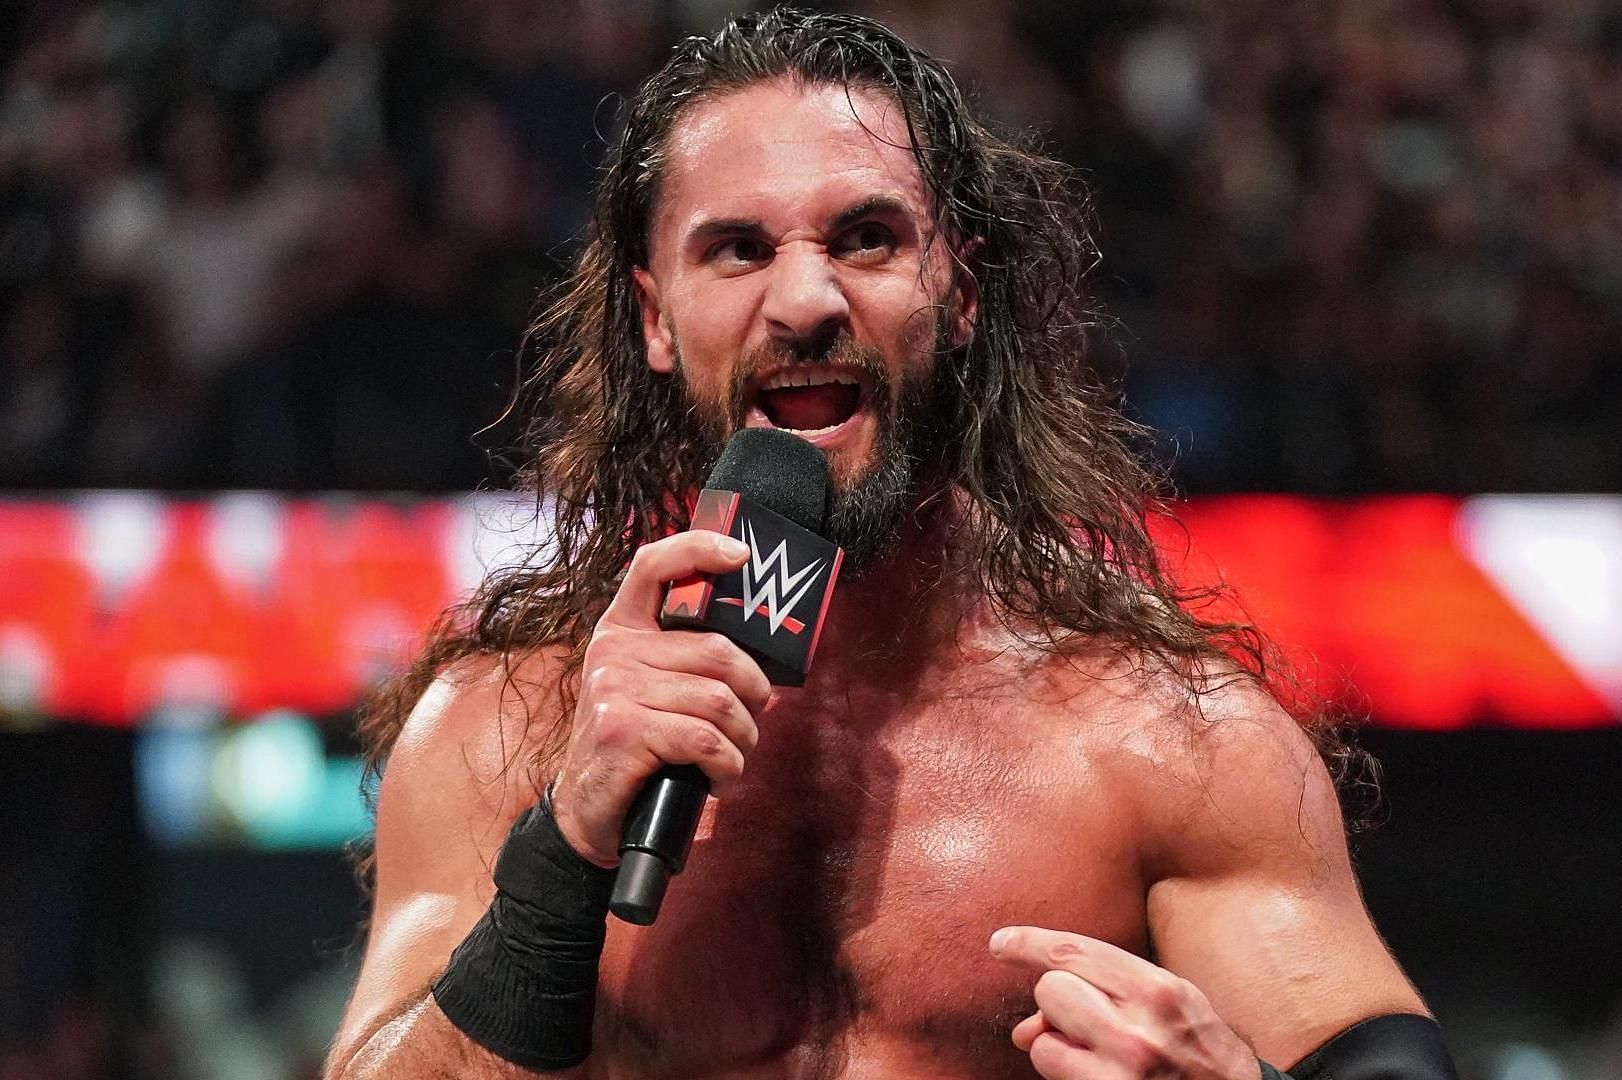 Rollins has Money in the Bank on his mind.